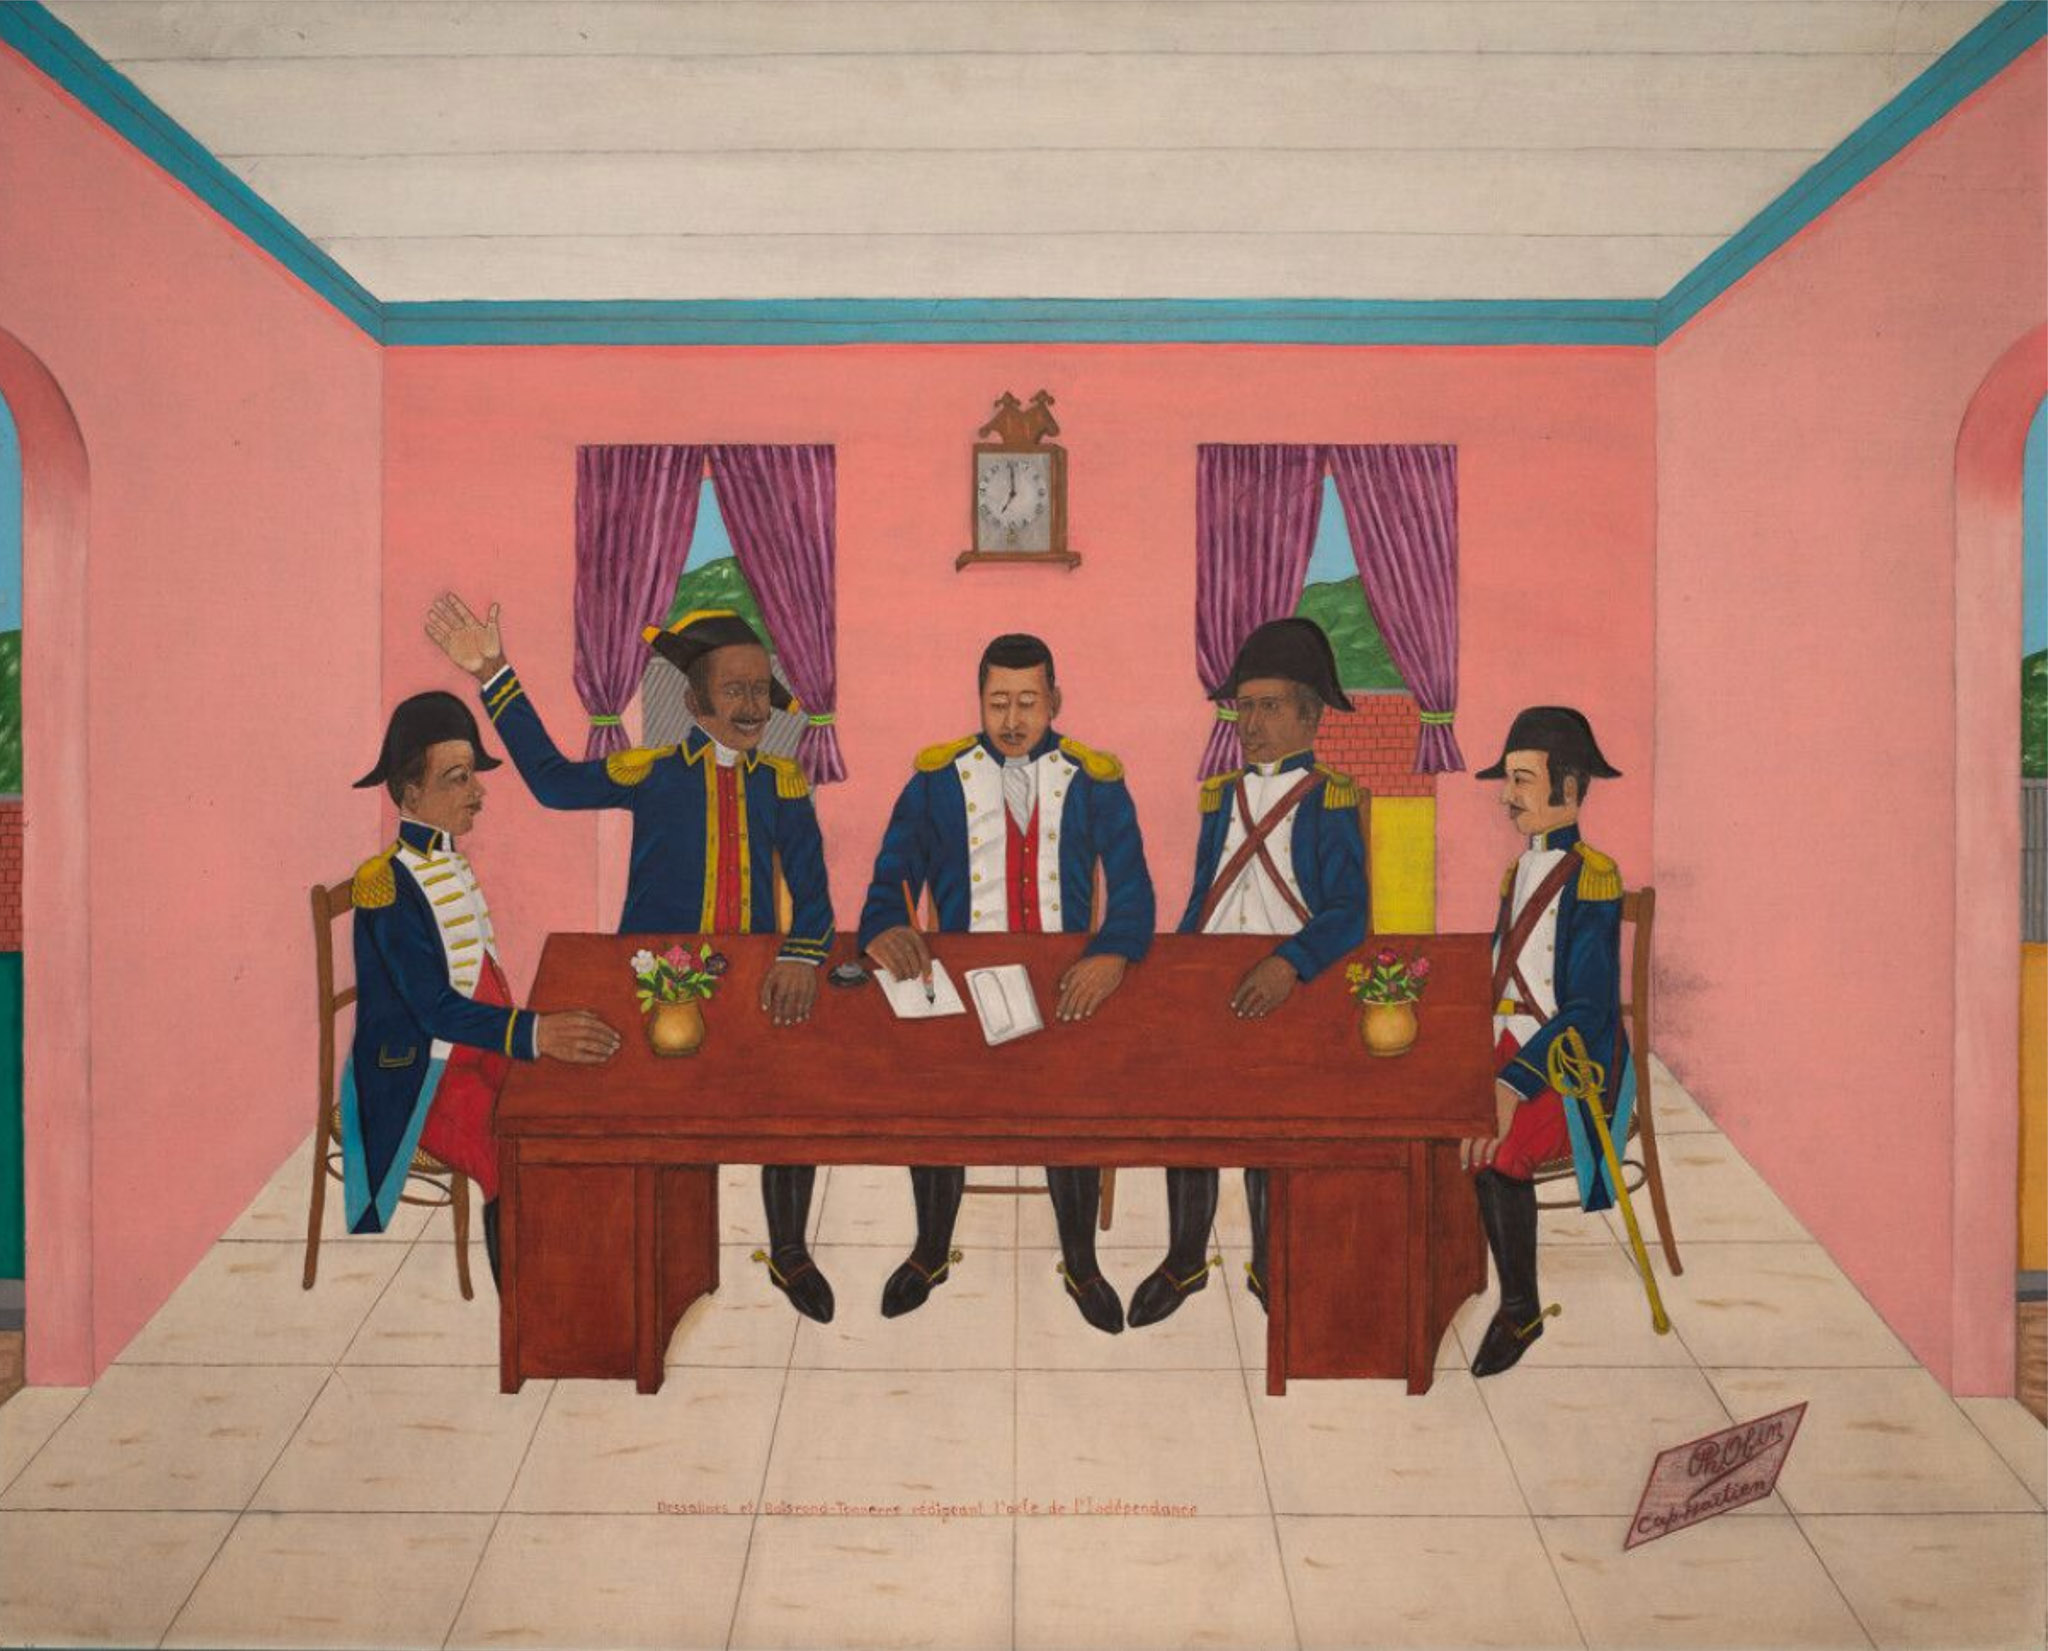 Dessalines and Boisrond-Tonnerre writing the act of independence, n.d.